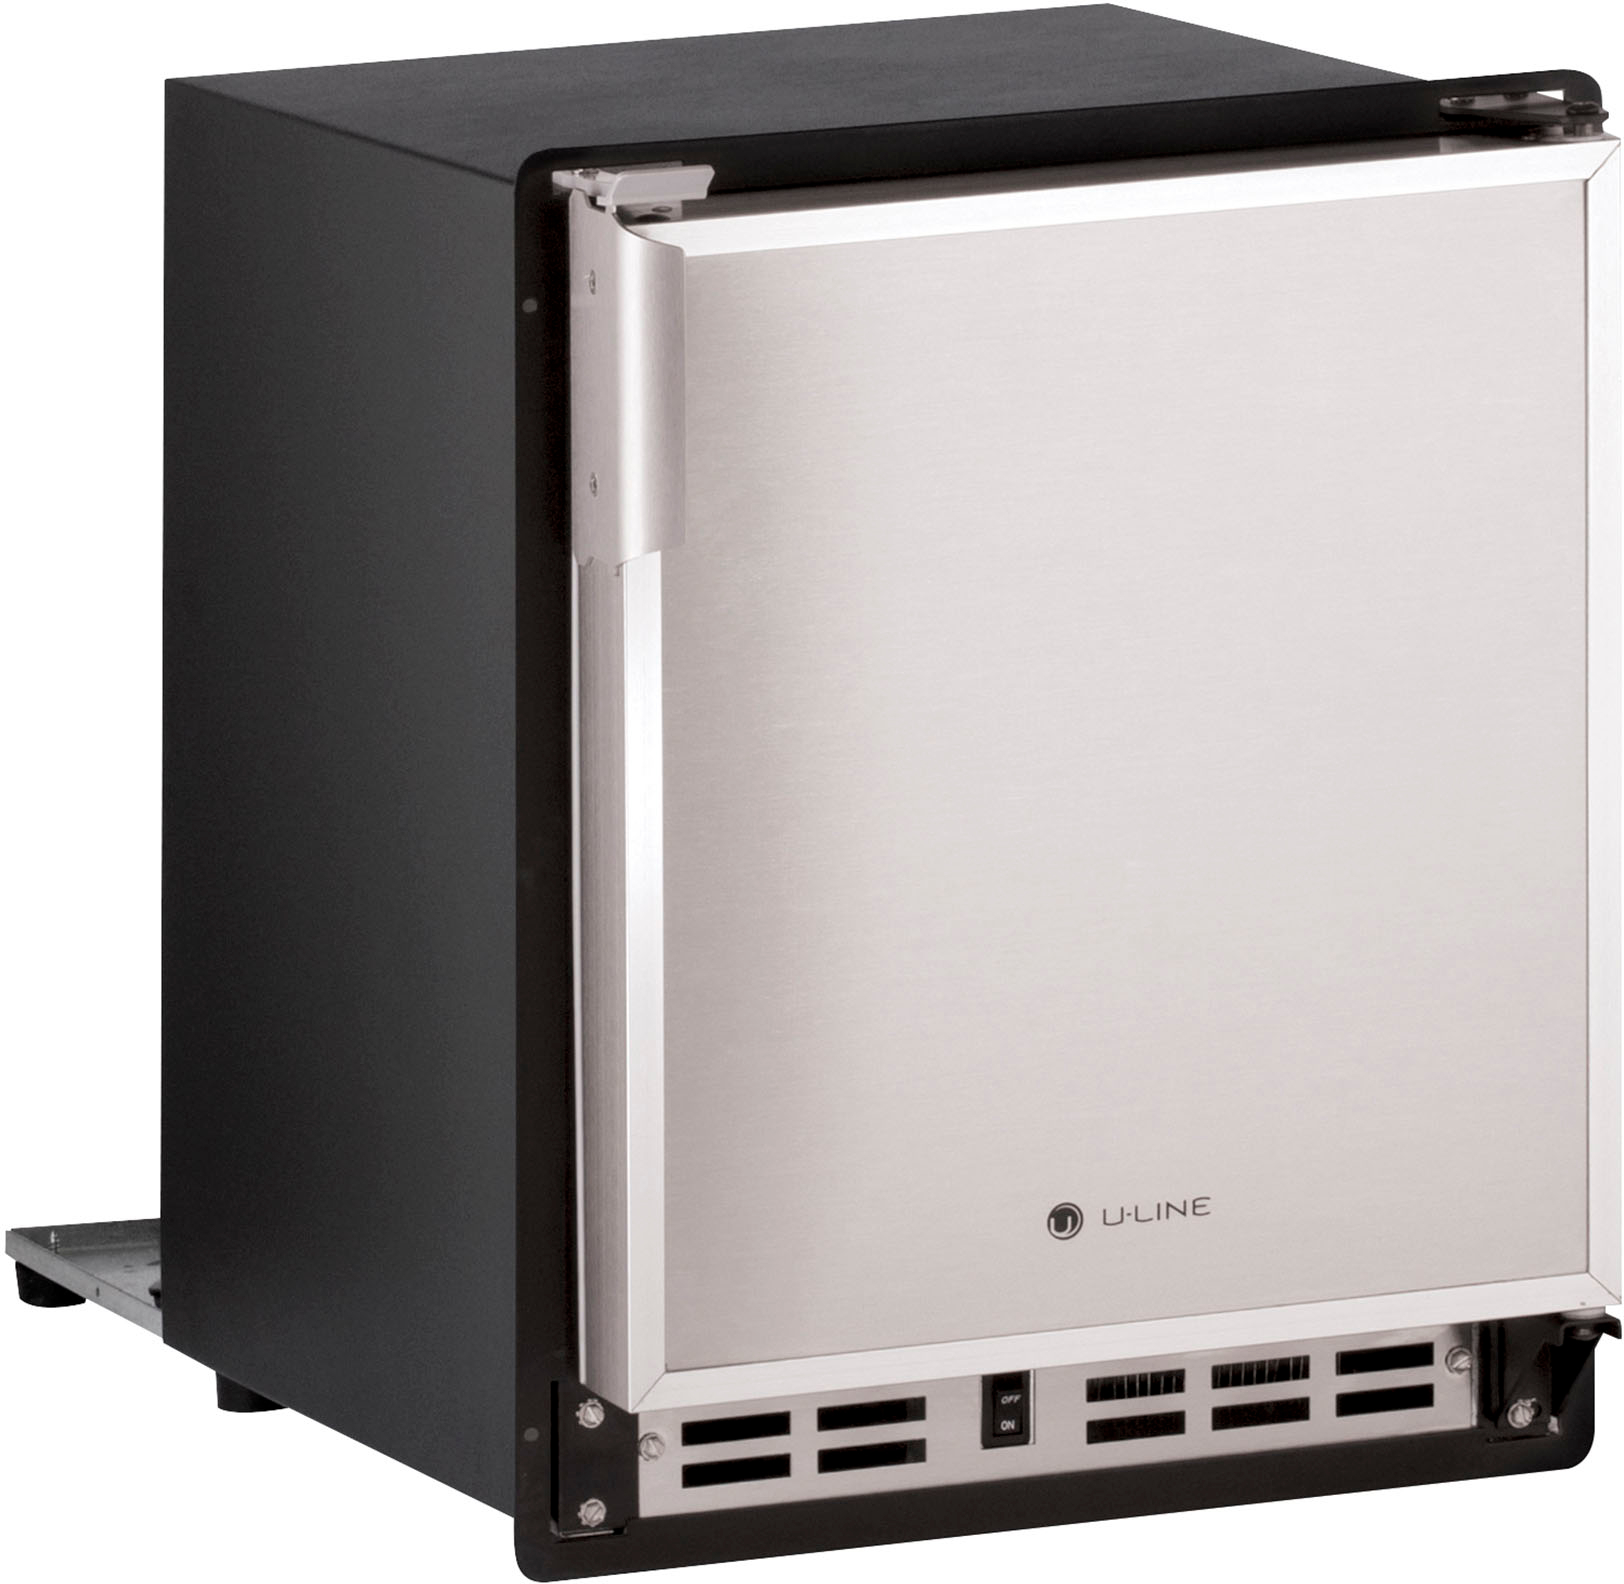 Angle View: U-Line - 14" 23-Lb Freestanding Icemaker - Stainless Steel